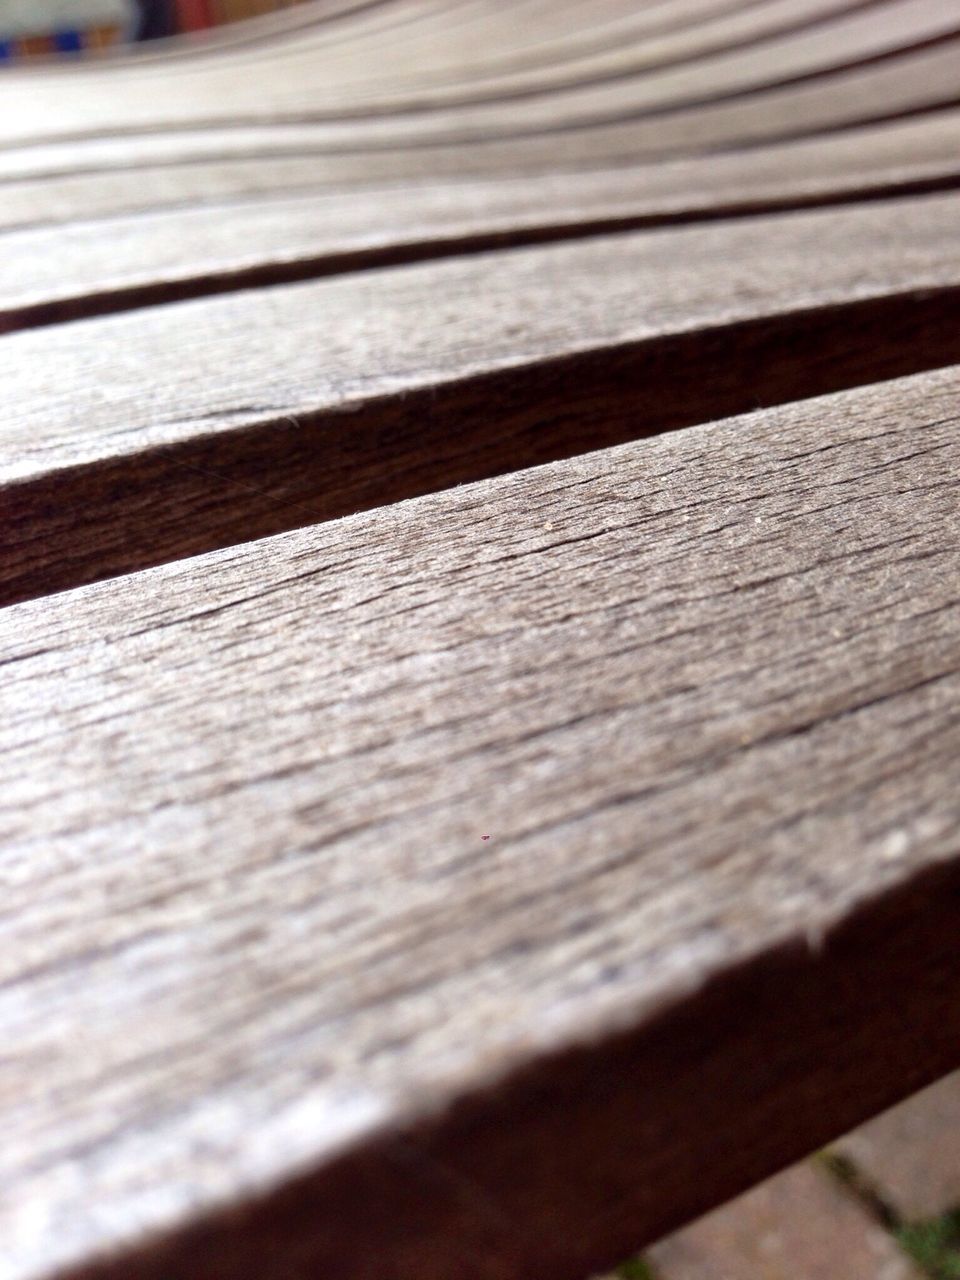 wood - material, wooden, plank, wood, selective focus, close-up, boardwalk, textured, surface level, wood paneling, pier, focus on foreground, brown, day, table, pattern, no people, high angle view, indoors, bench